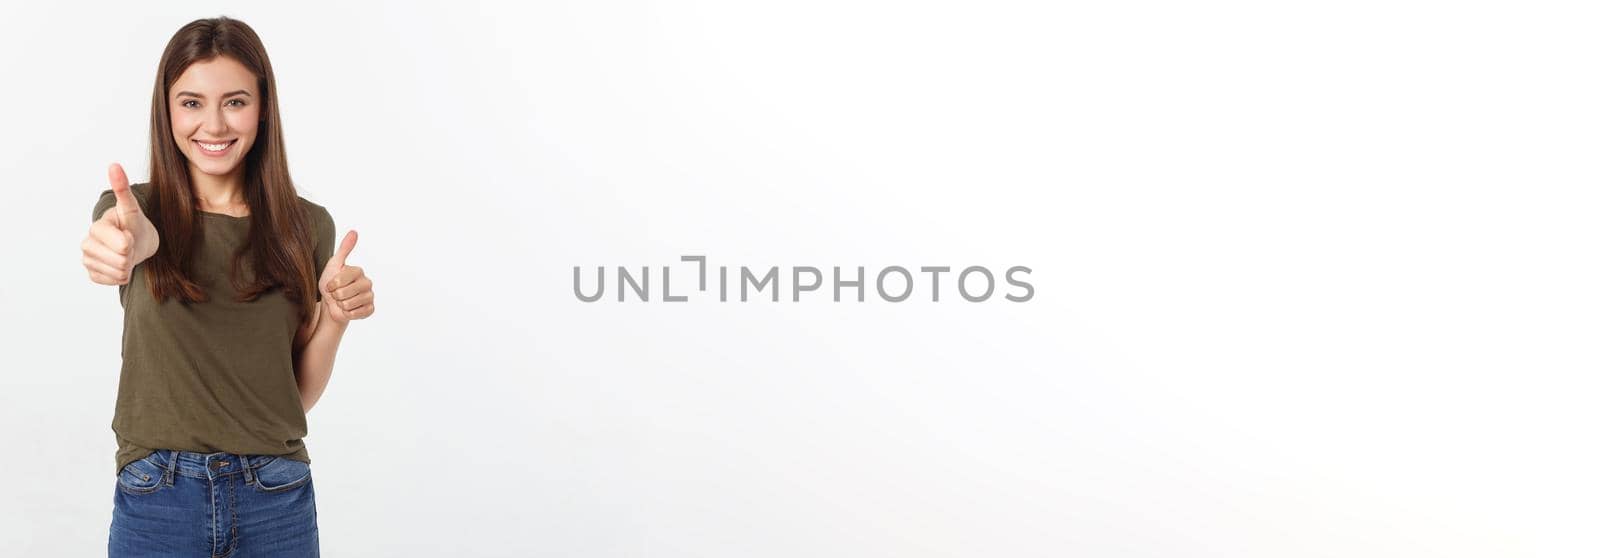 Closeup portrait of a beautiful young woman showing thumbs up sign. Isolate over white background